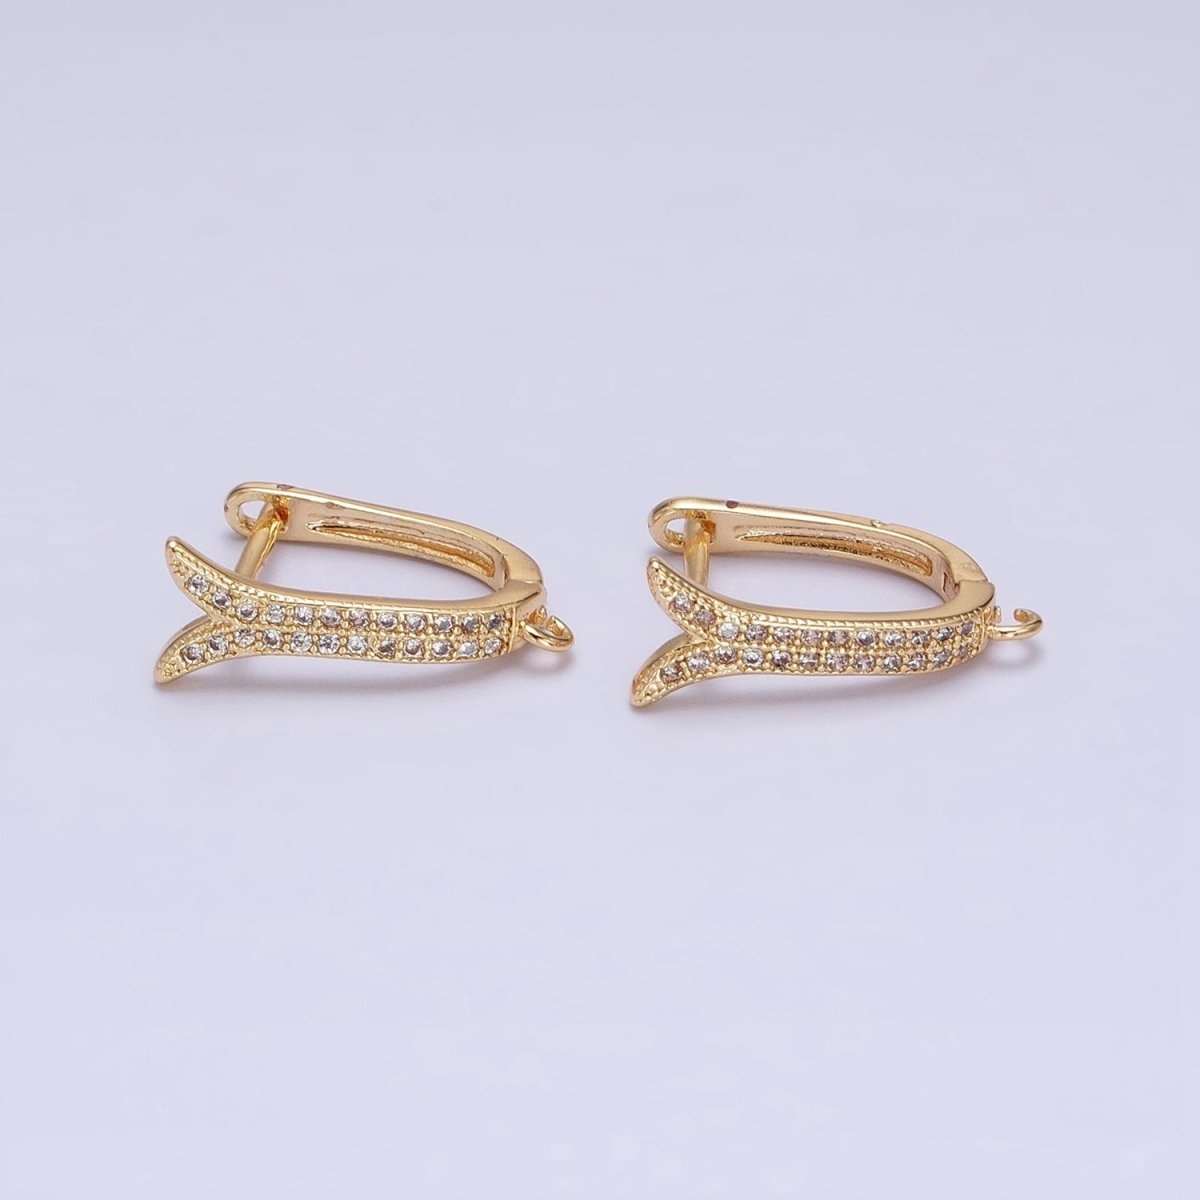 24K Gold Filled Micro Paved CZ Ocean Whale Tail Open Loop English Lock Earrings in Gold & Silver | Z-233 Z-234 - DLUXCA